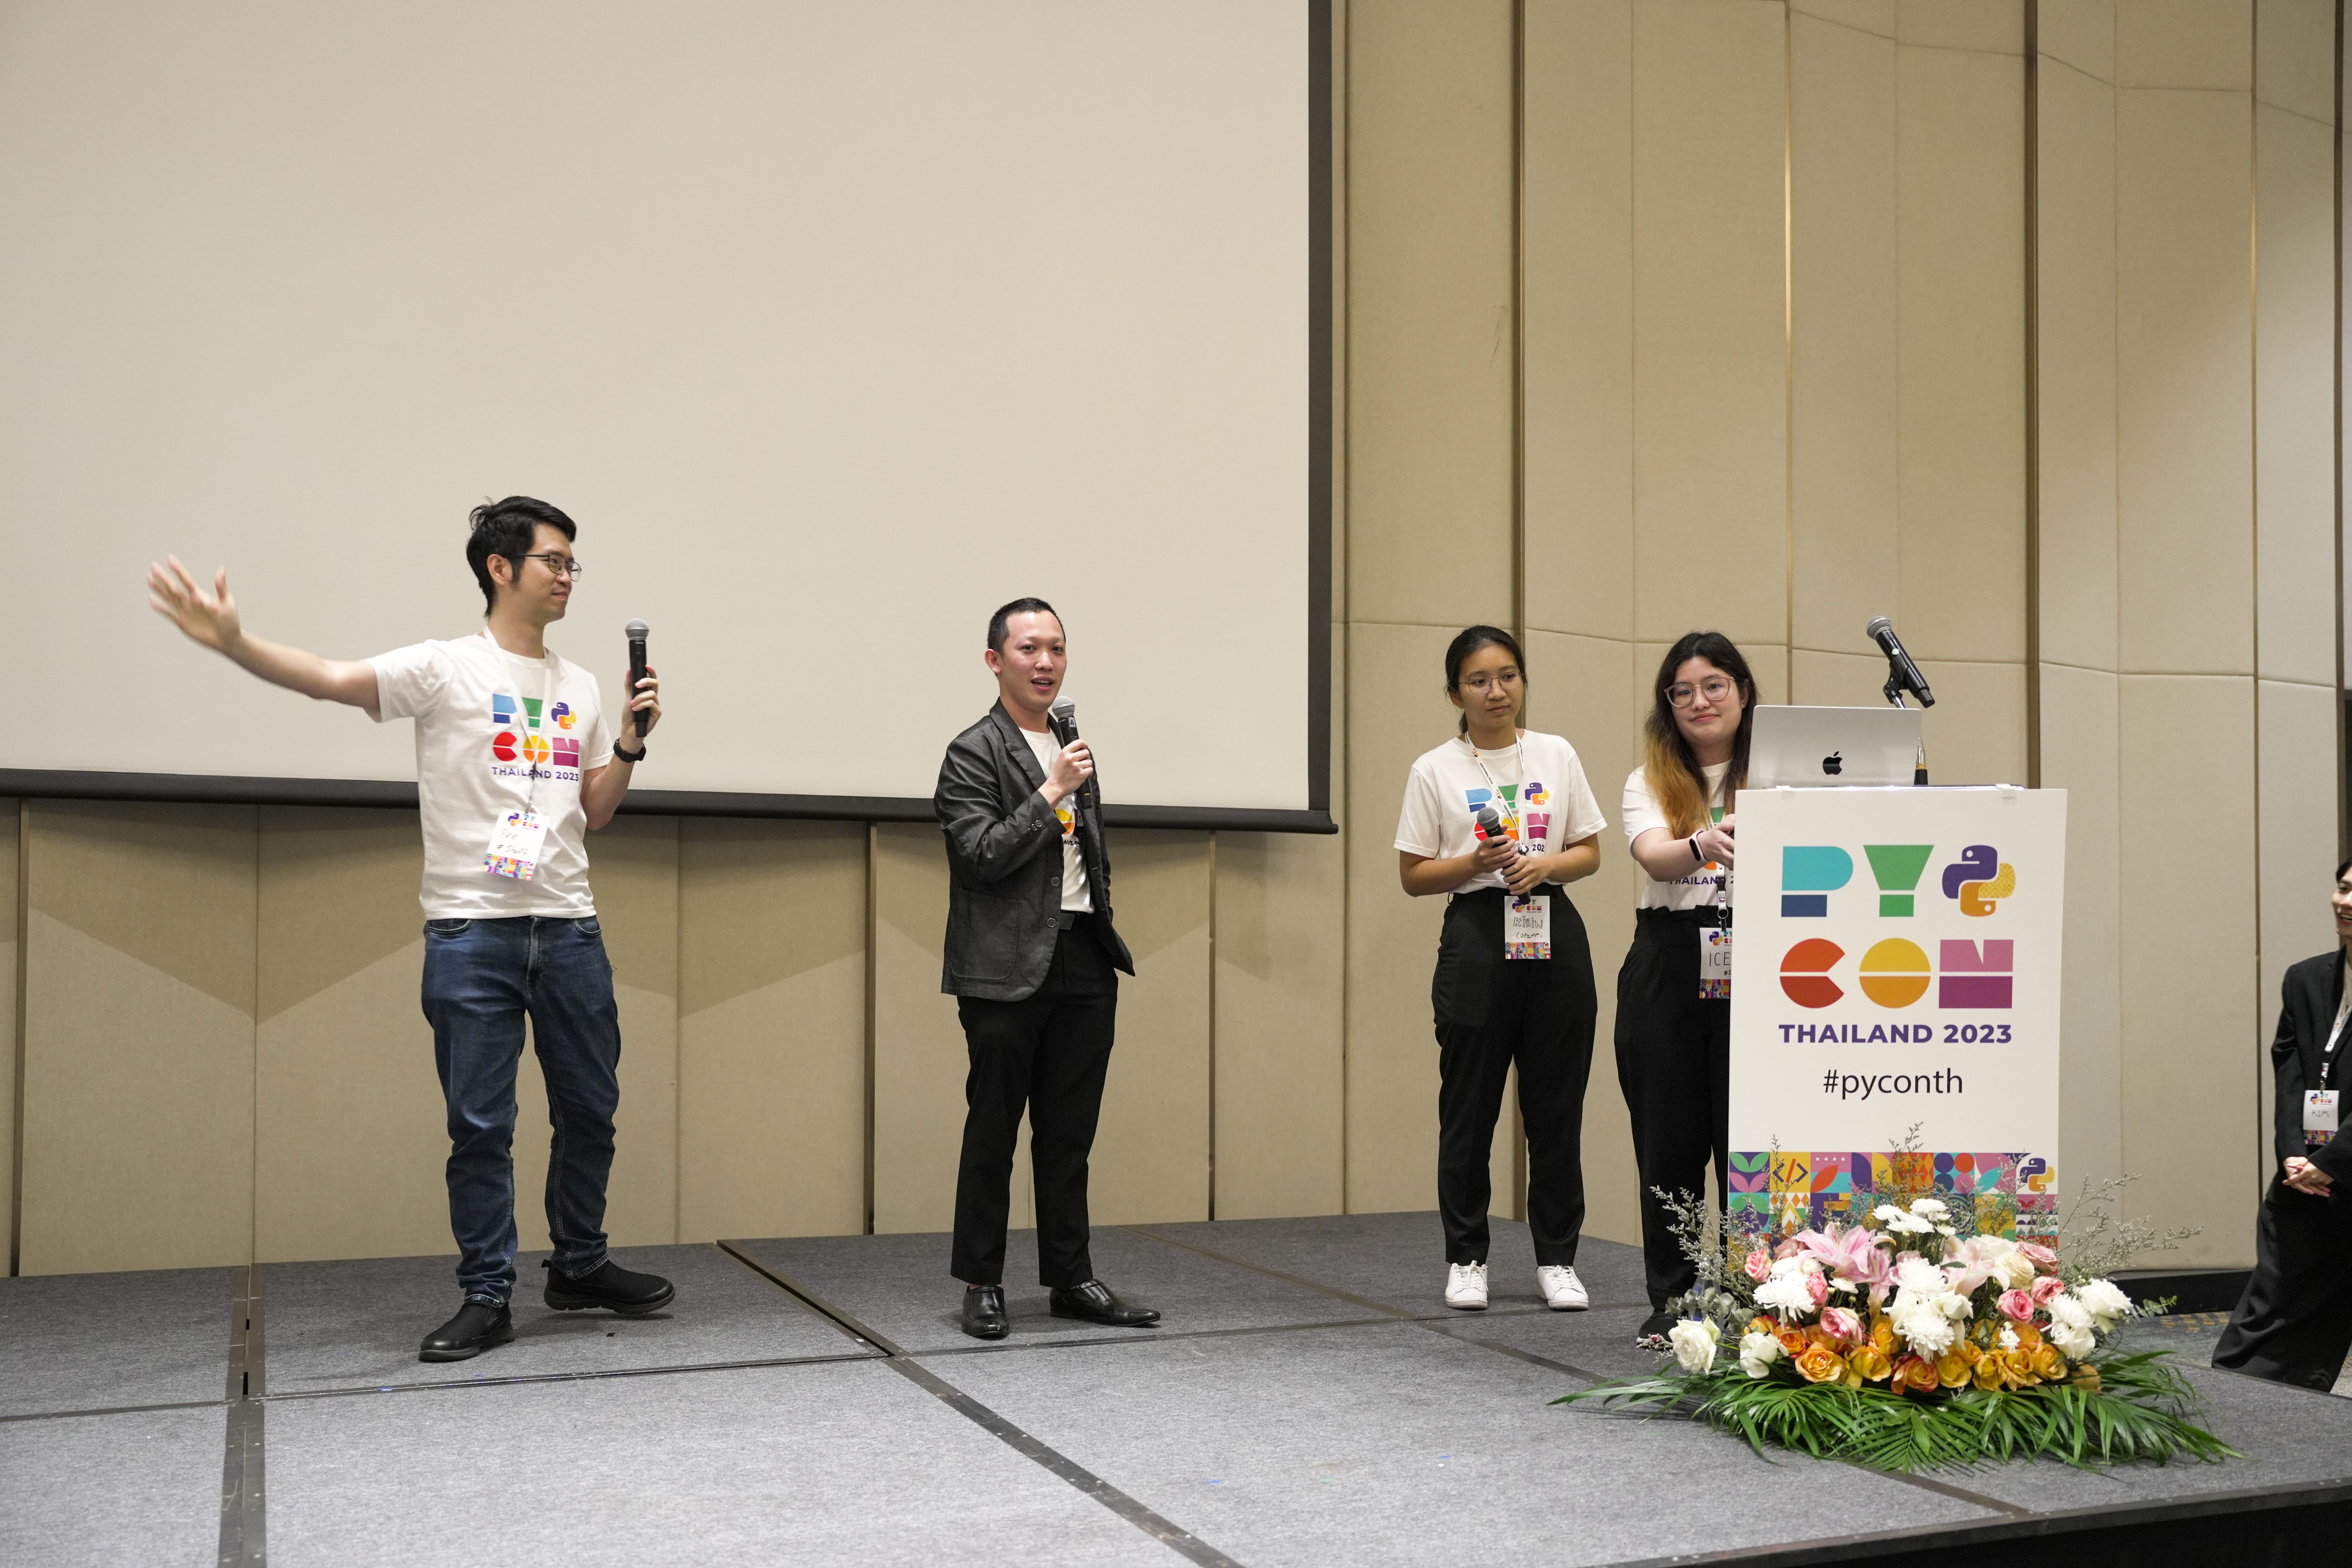 PyConTH 2023 - Tech team on stage